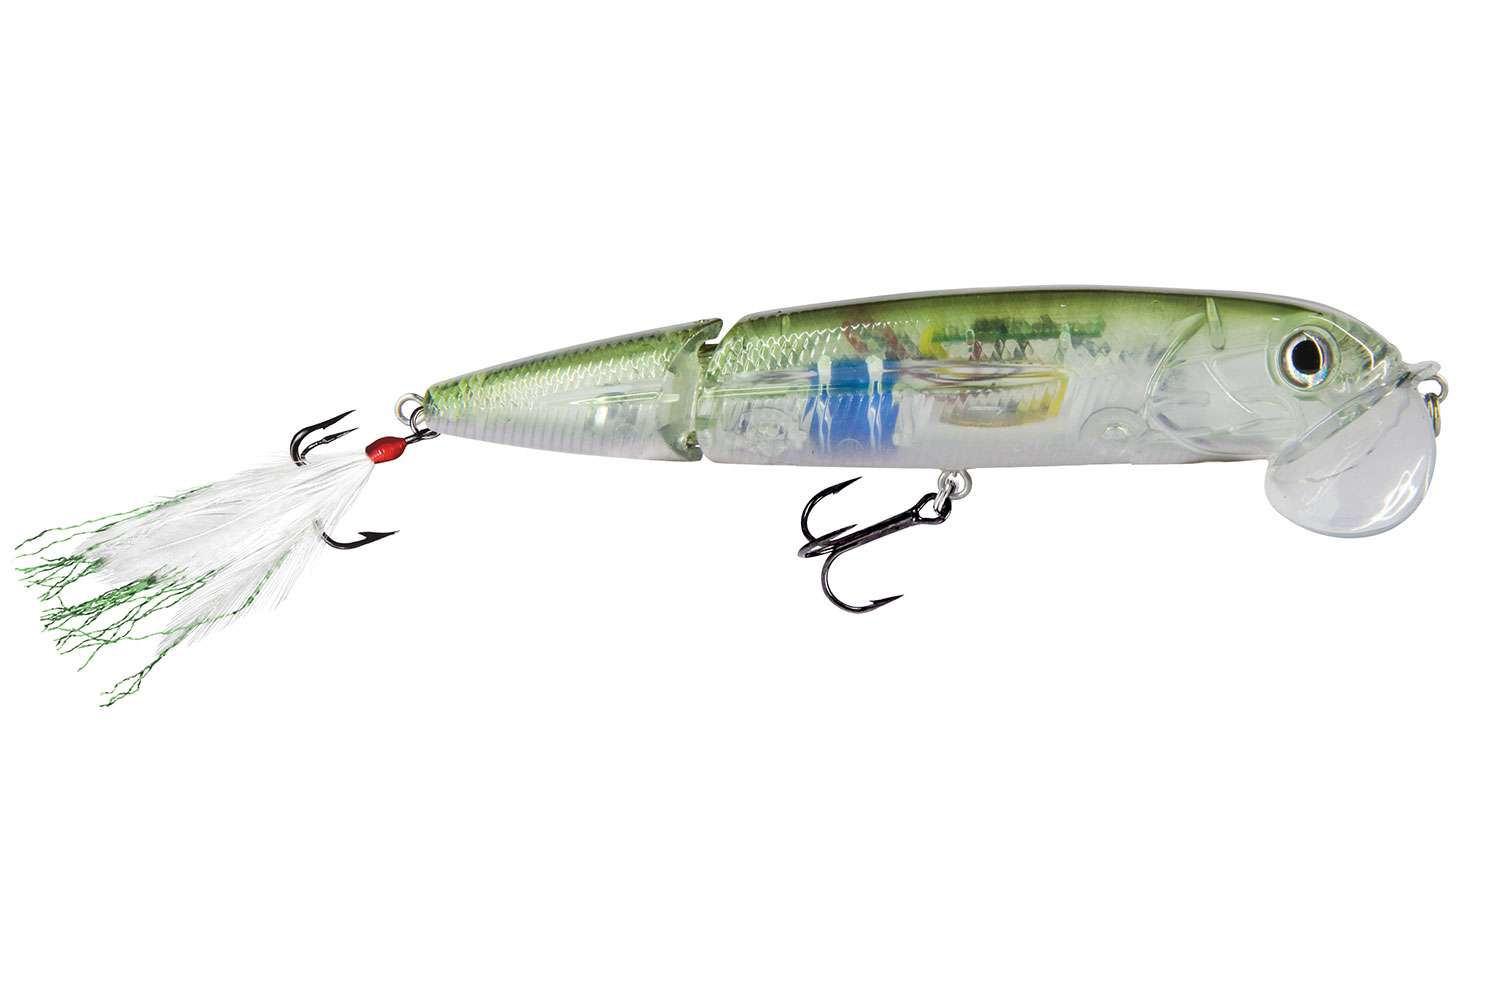 <B>Livingston Walking Boss II Jr.</B><br>
The Walking Boss II Jr. is a revolutionary topwater lure that features an exaggerated, oversized and cupped lip, which creates a uniquely powerful surface disturbance when itâs retrieved. And it is simple for even the most inexperienced angler to fish. Simply cast and retrieve â either slow or fast â and the unique design of the lip and jointed body create a topwater commotion that drives fish wild. The Walking Boss II Jrâs action is combined with the attraction of EBS Technology to draw fish from double the distance of traditional topwater lures.
